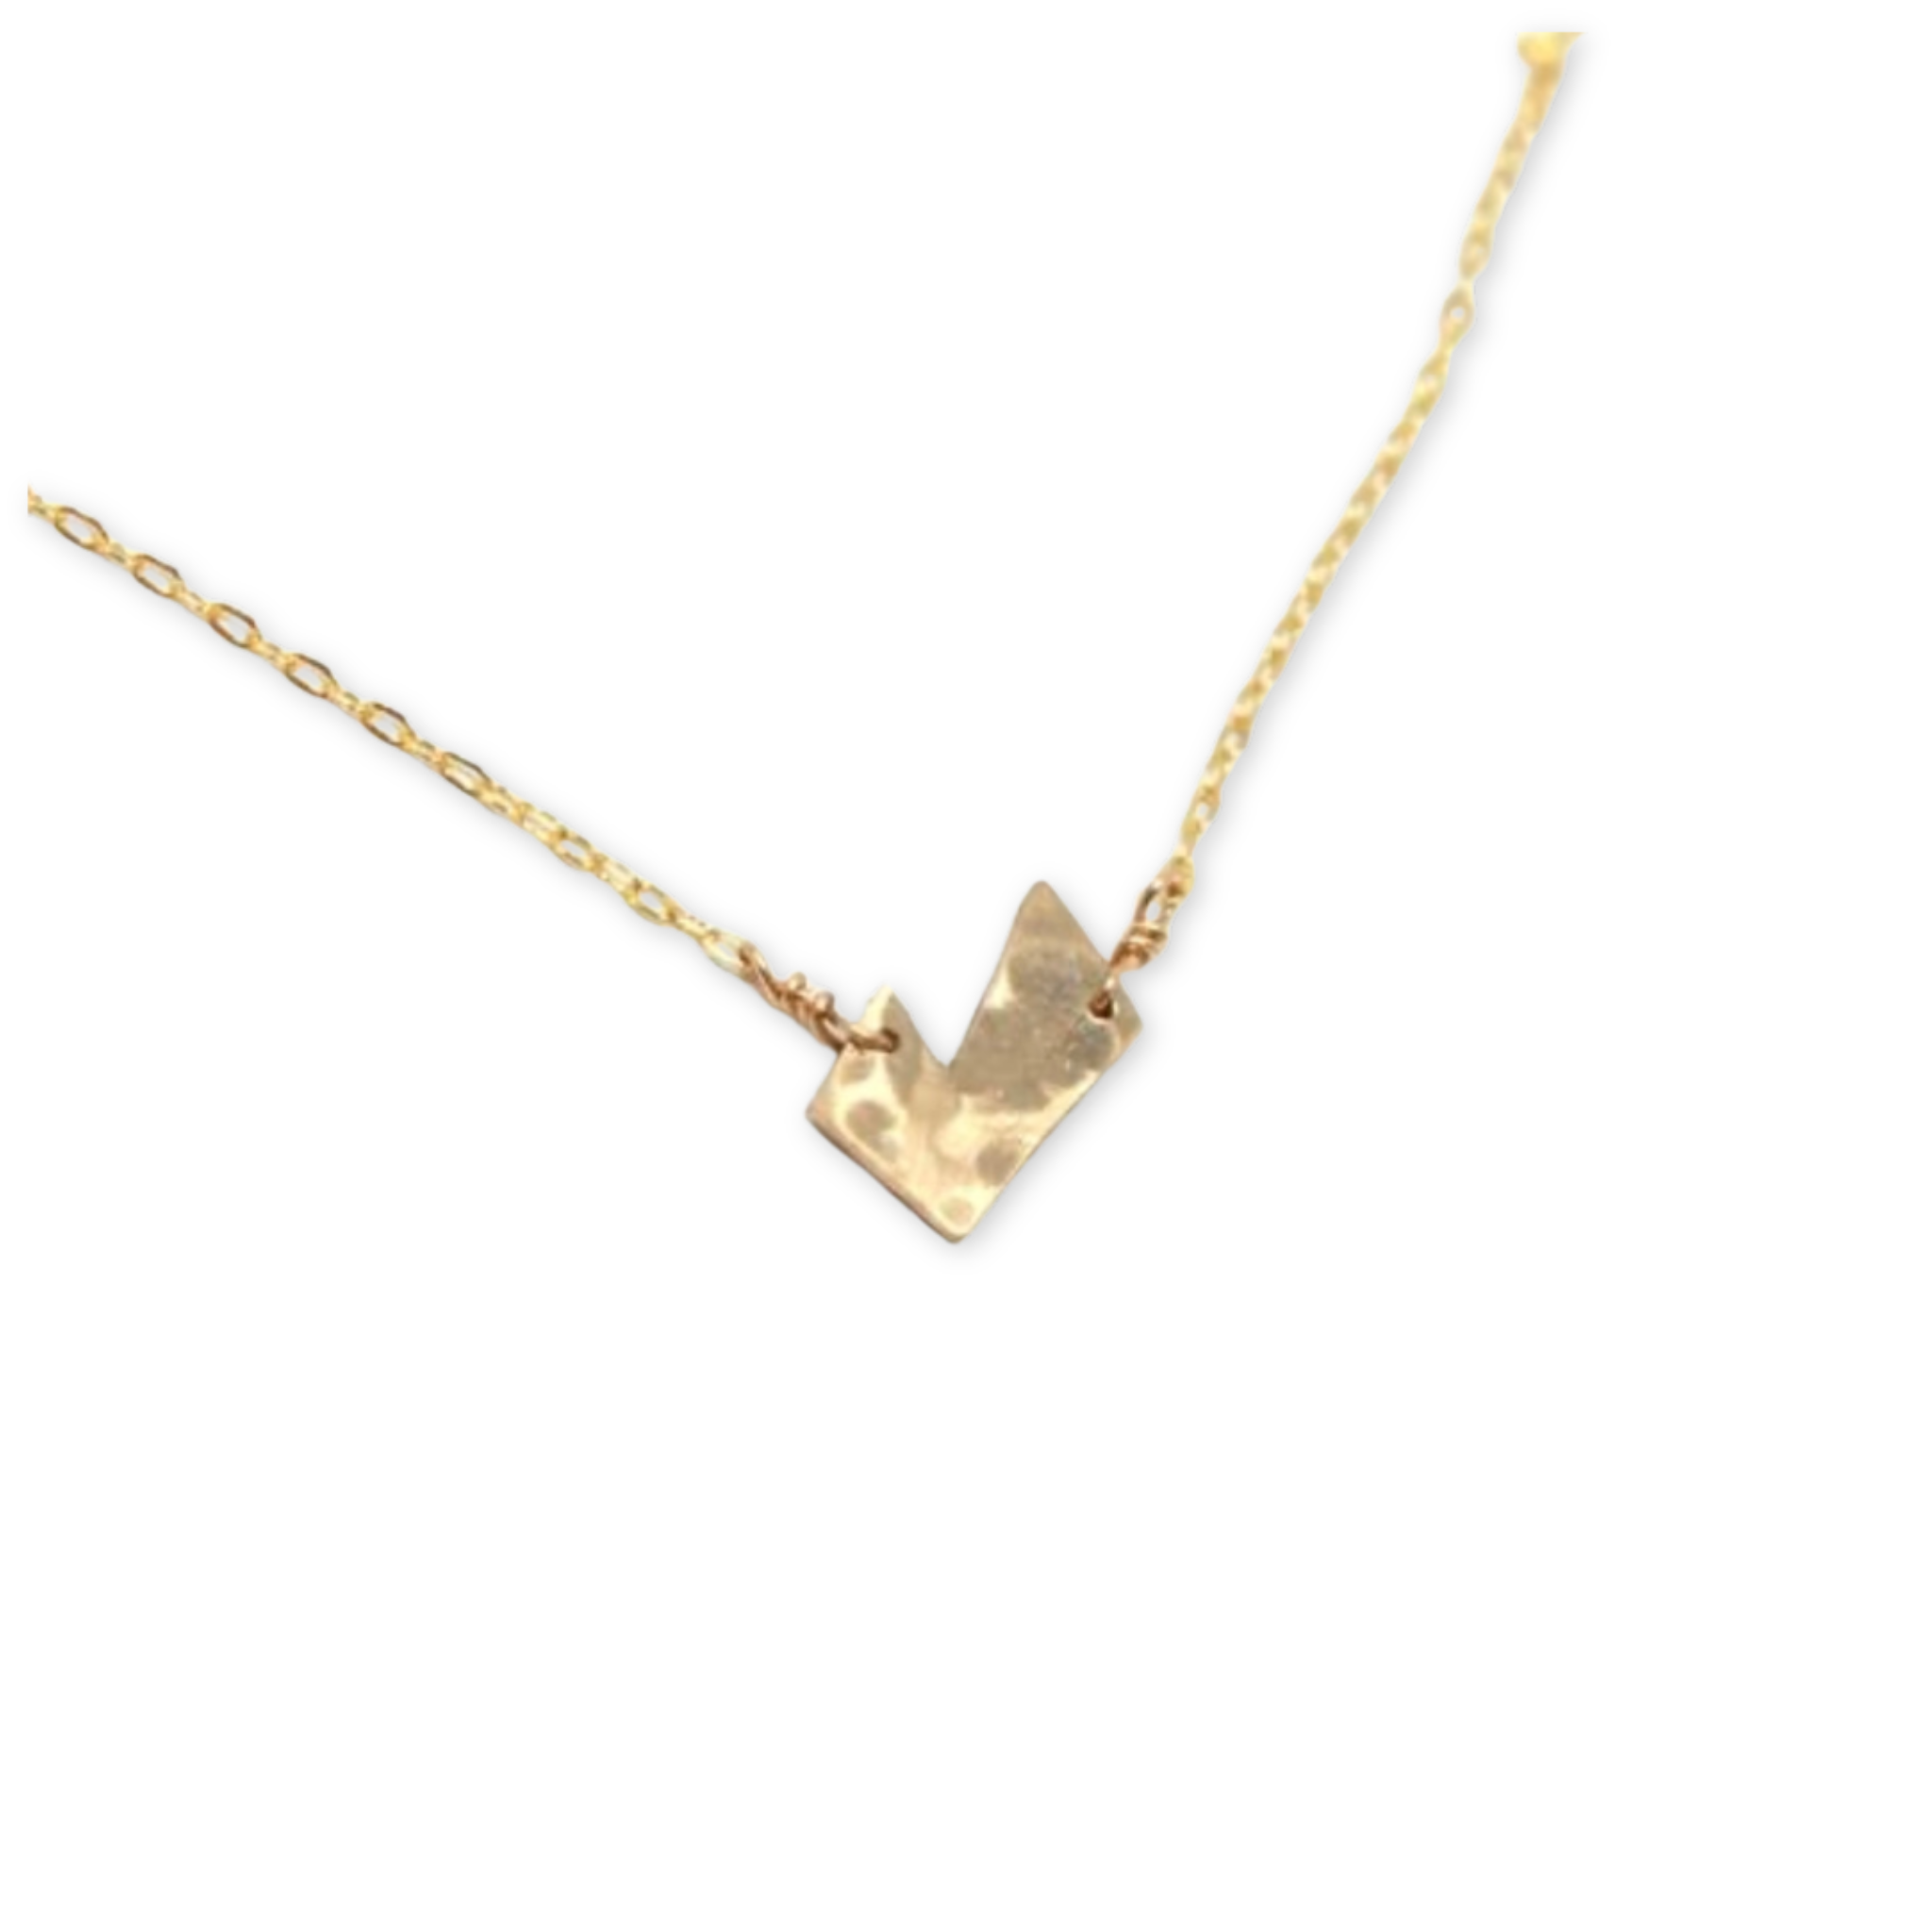 hammered check mark pendant on a delicate necklace chain